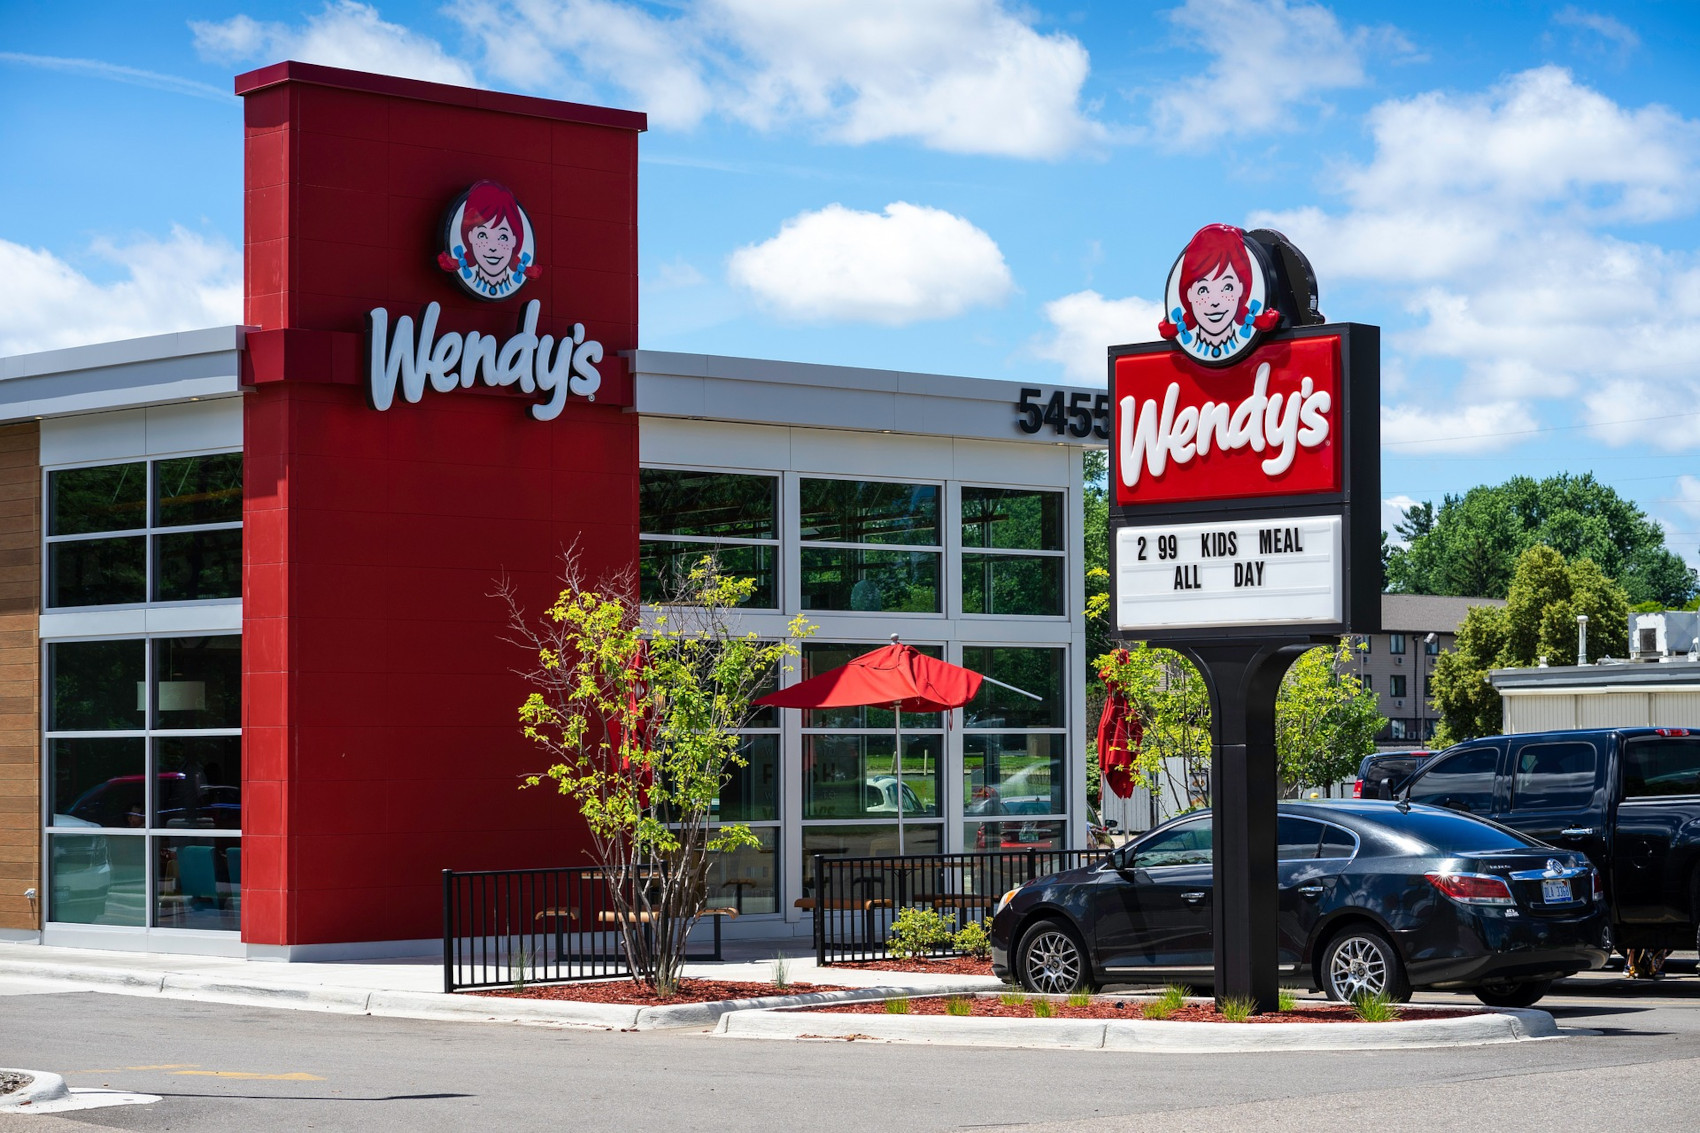 Wendy's - Image by Michael Form from Pixabay